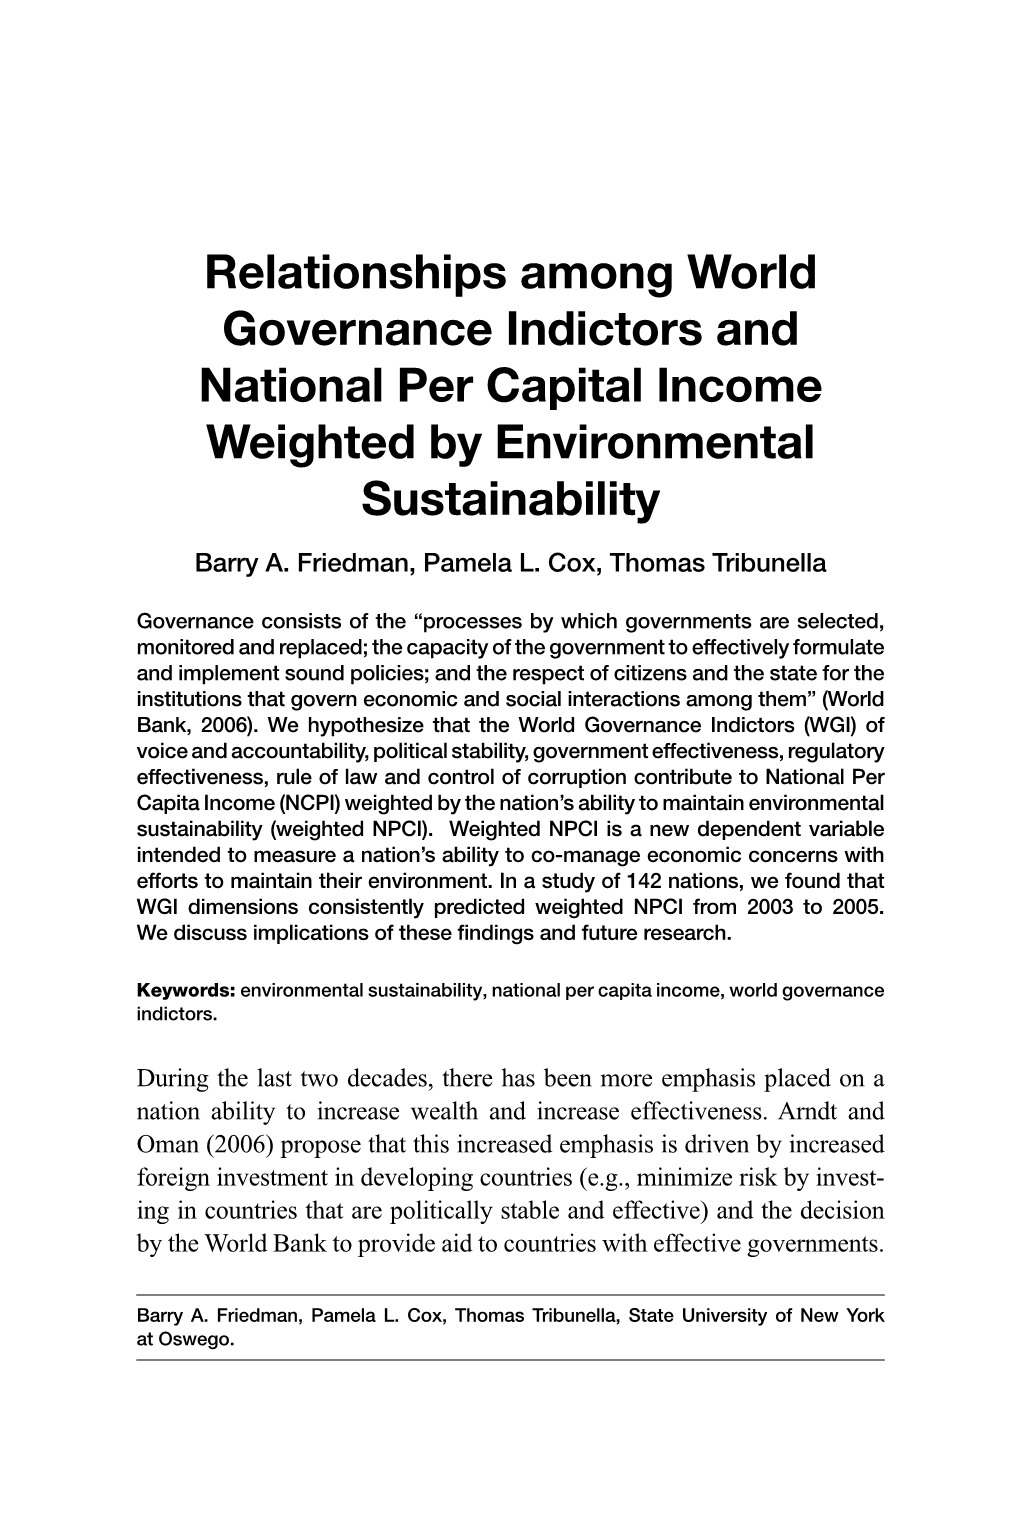 Relationships Among World Governance Indictors and National Per Capital Income Weighted by Environmental Sustainability